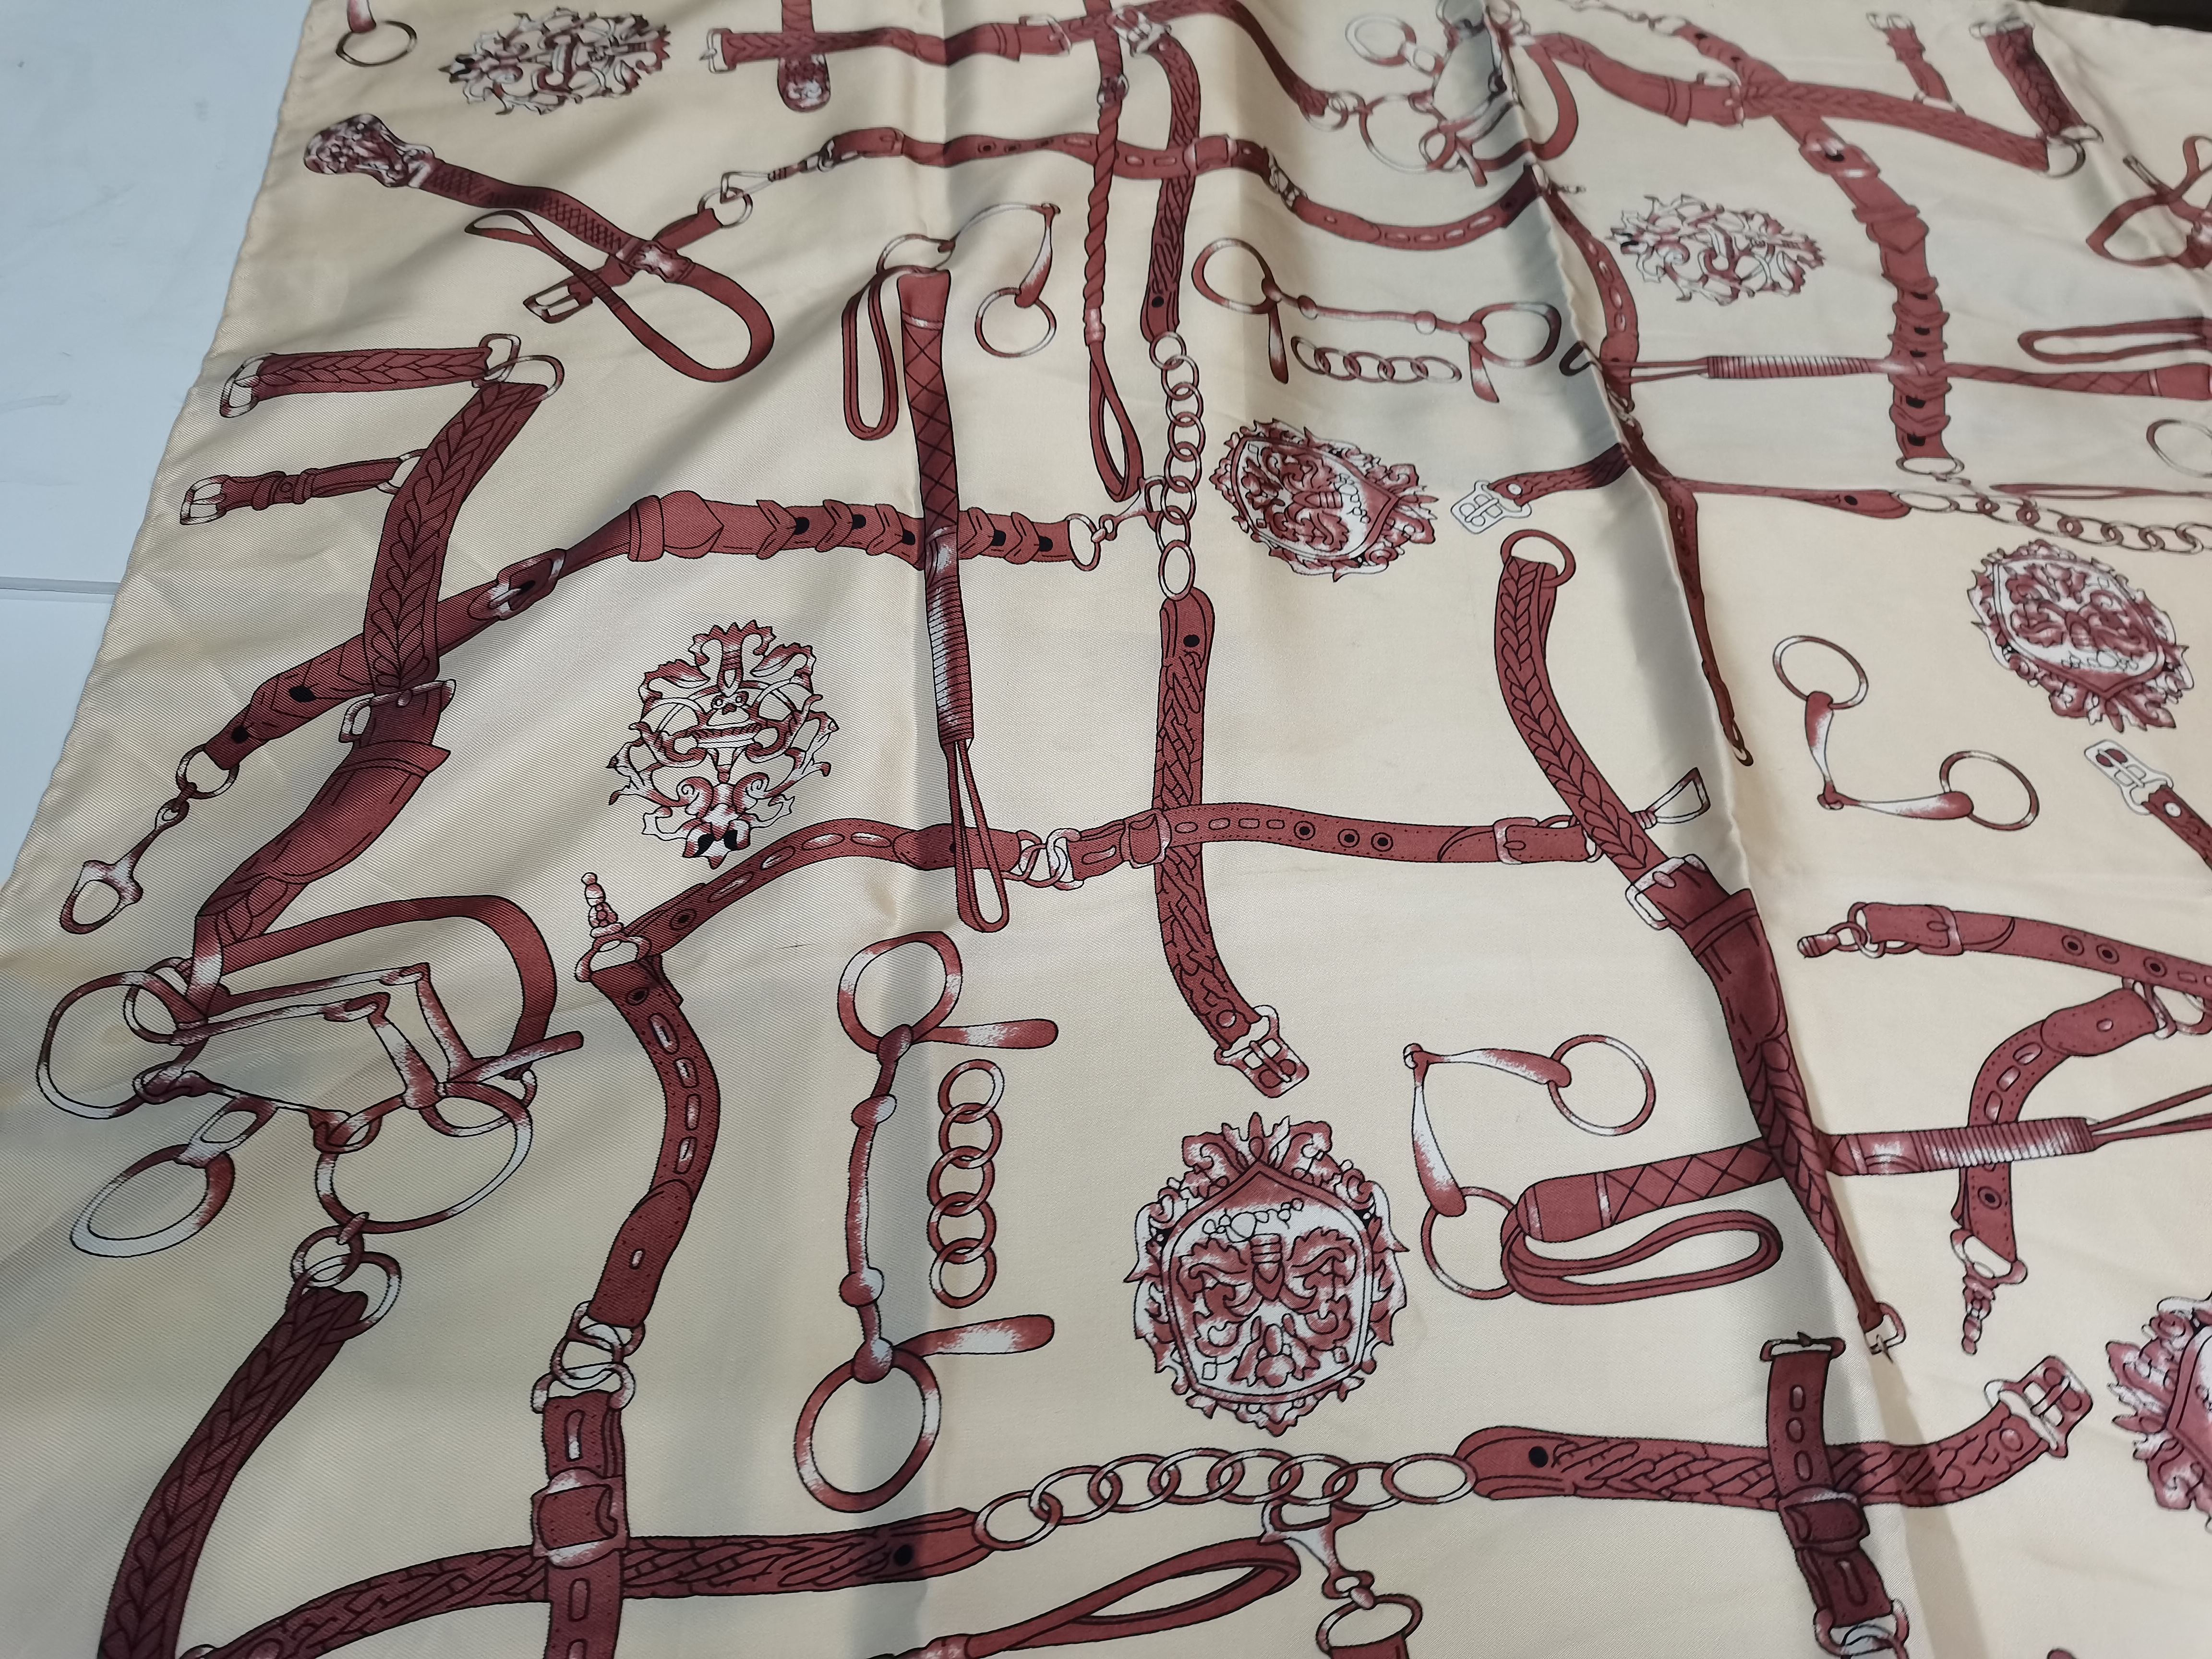 Genuine Hermes silk scarf, cream and brown with hand rolled hems. 33" x 33". Good vintage condition - Image 4 of 4